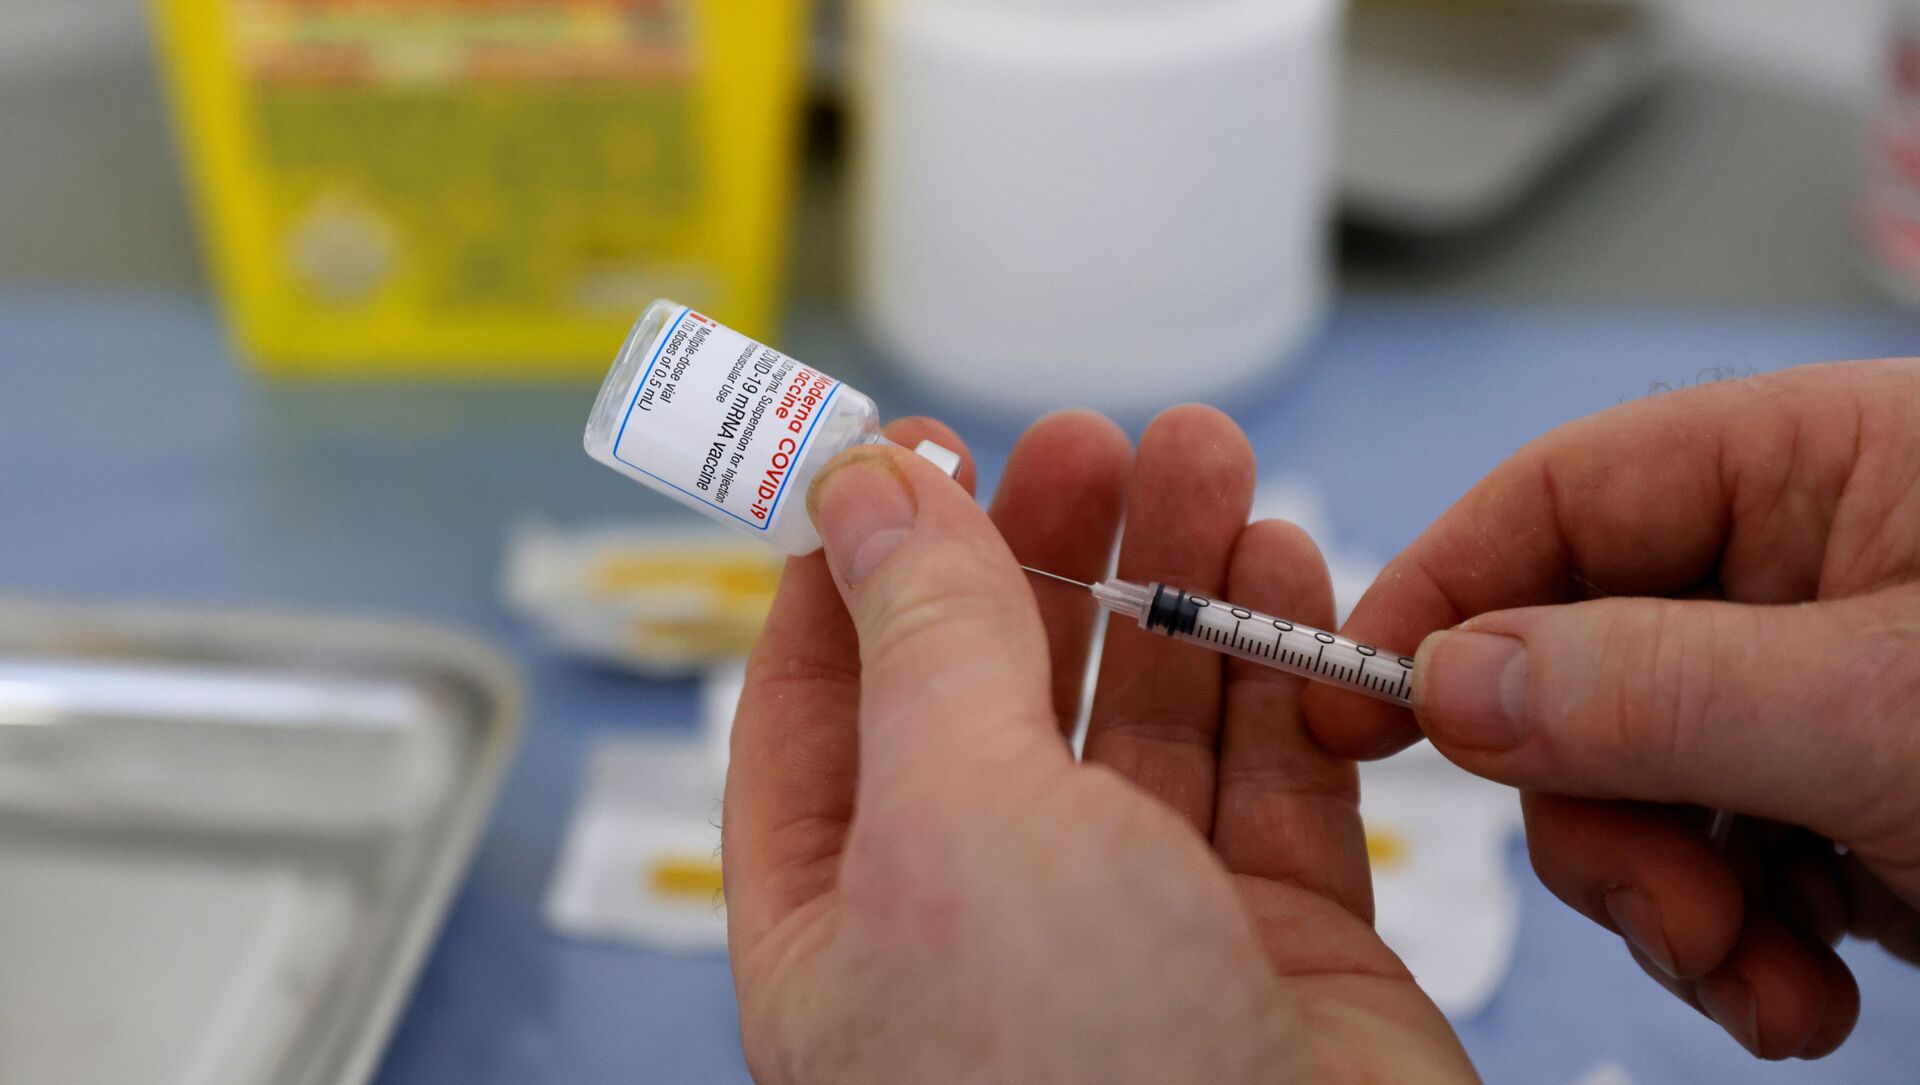 FILE PHOTO: A health worker prepares a syringe with a dose of the Moderna COVID-19 vaccine at a vaccination center in Calais as part of the coronavirus disease (COVID-19) vaccination campaign in France, March 4, 2021. - Sputnik International, 1920, 23.05.2021